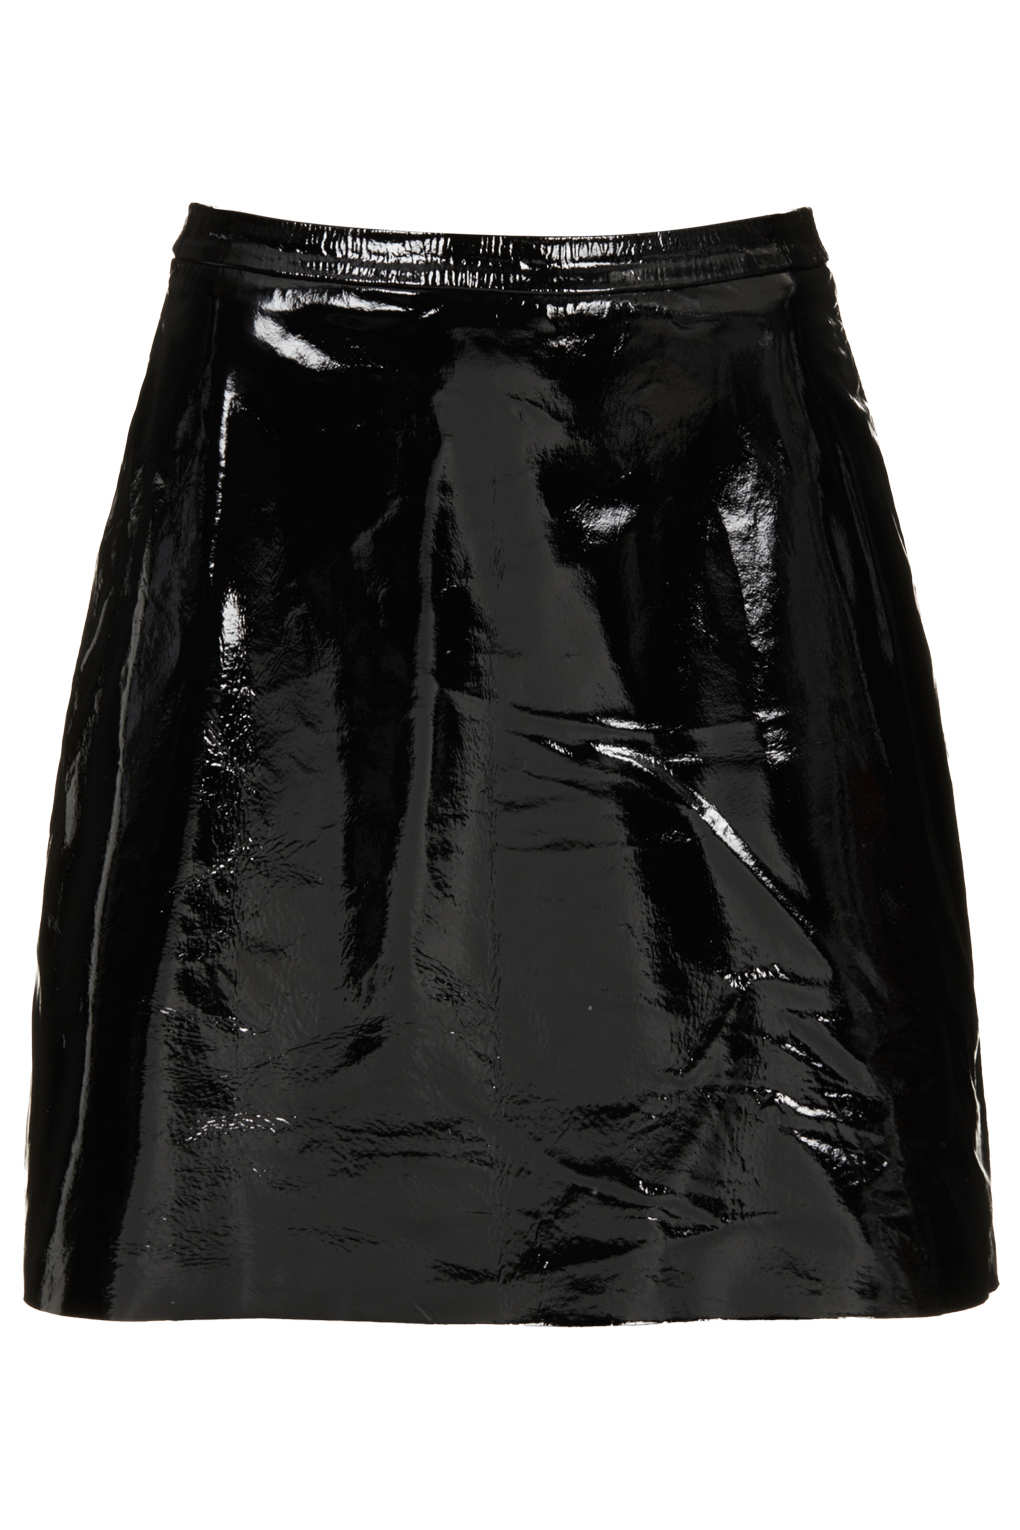 Lyst - Topshop Patent Leather A-line Skirt By Boutique in Black